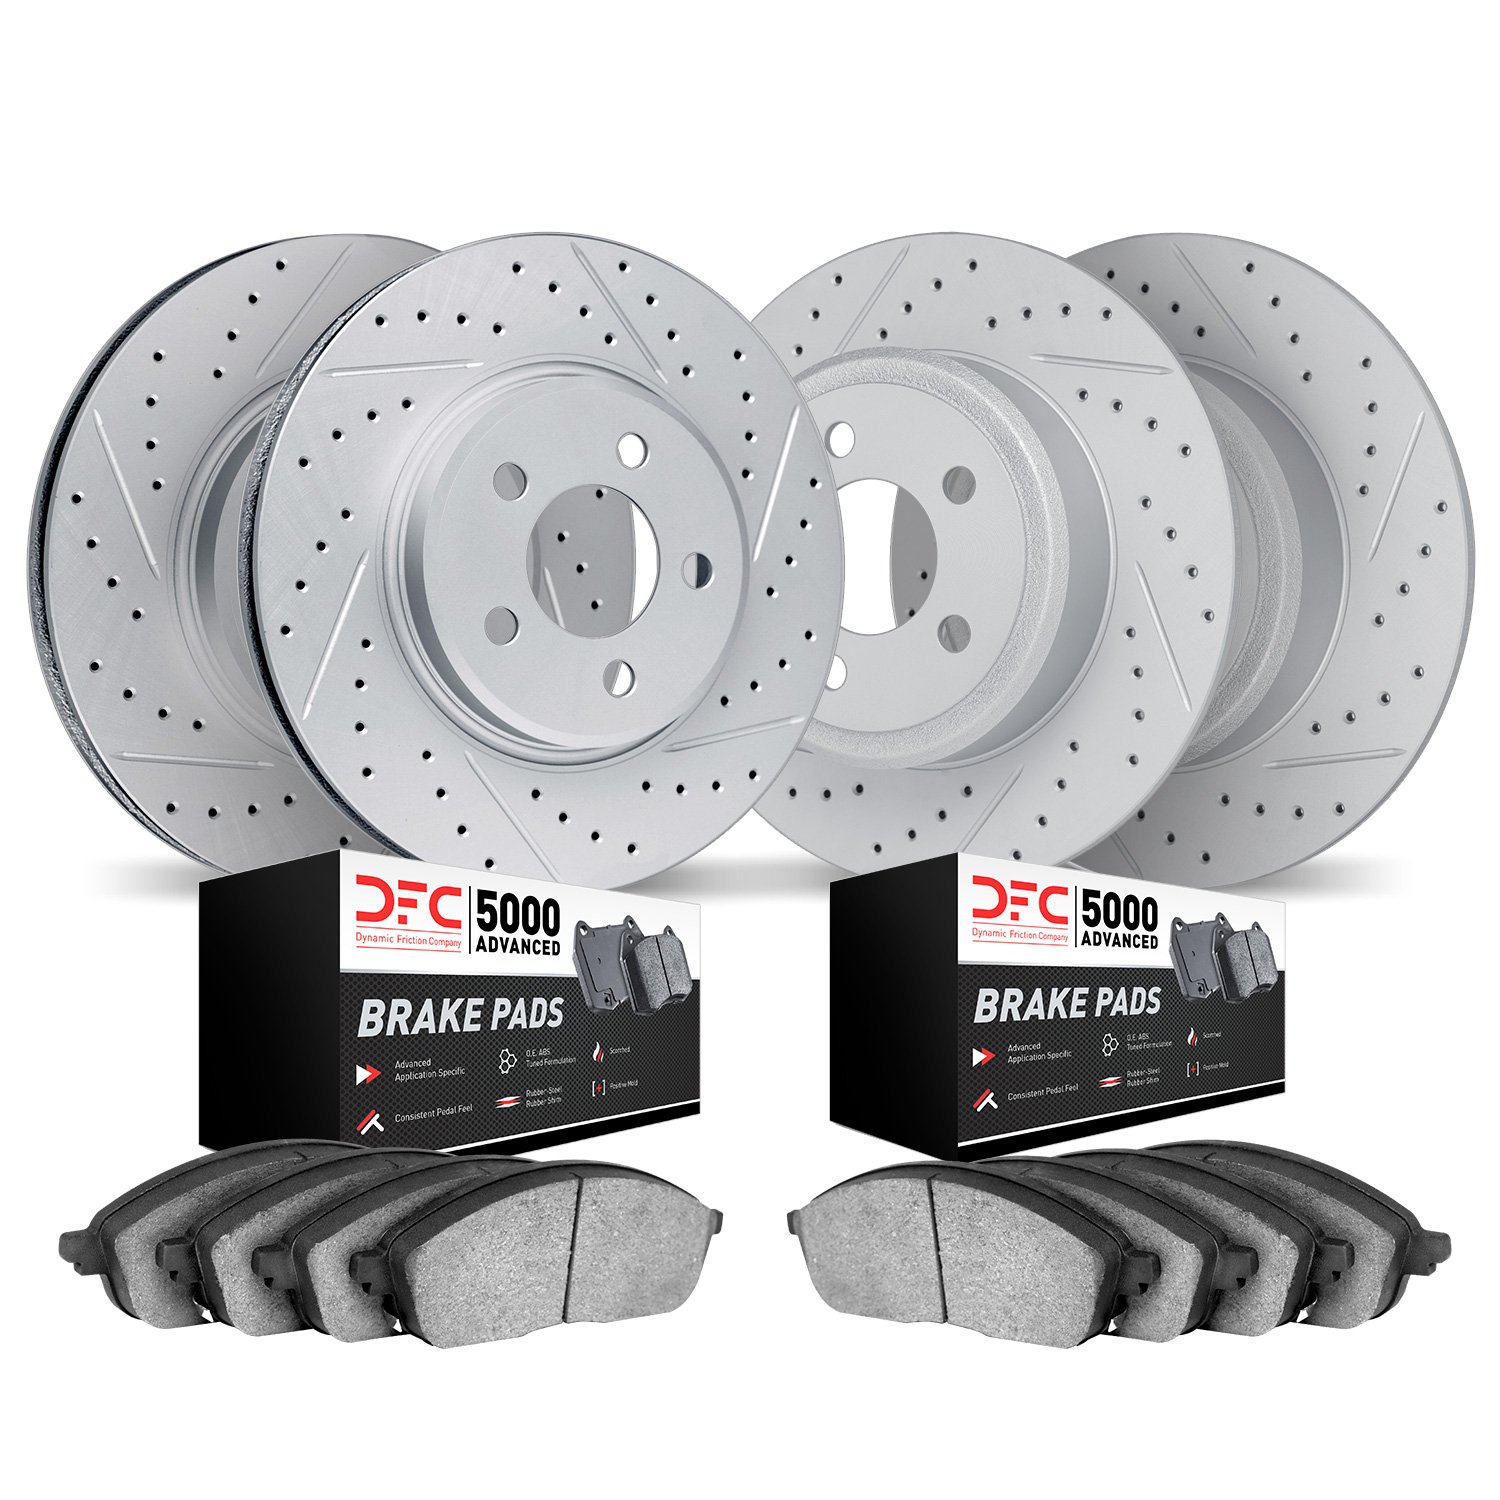 2504-11015 Geoperformance Drilled/Slotted Rotors w/5000 Advanced Brake Pads Kit, 2016-2019 Land Rover, Position: Front and Rear